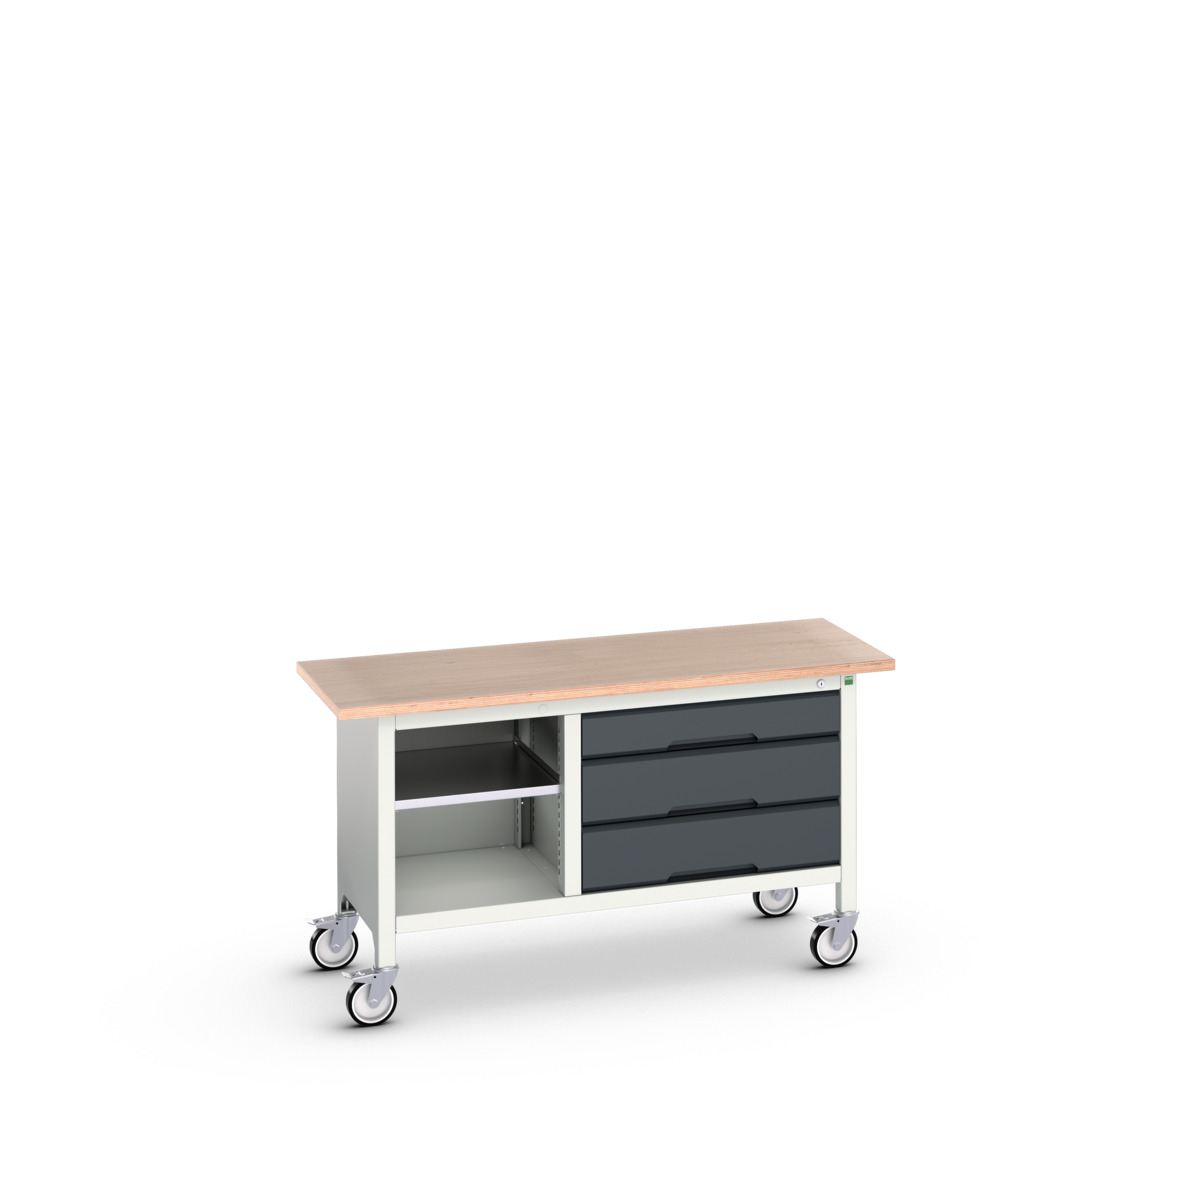 16923213. - verso mobile storage bench (mpx)